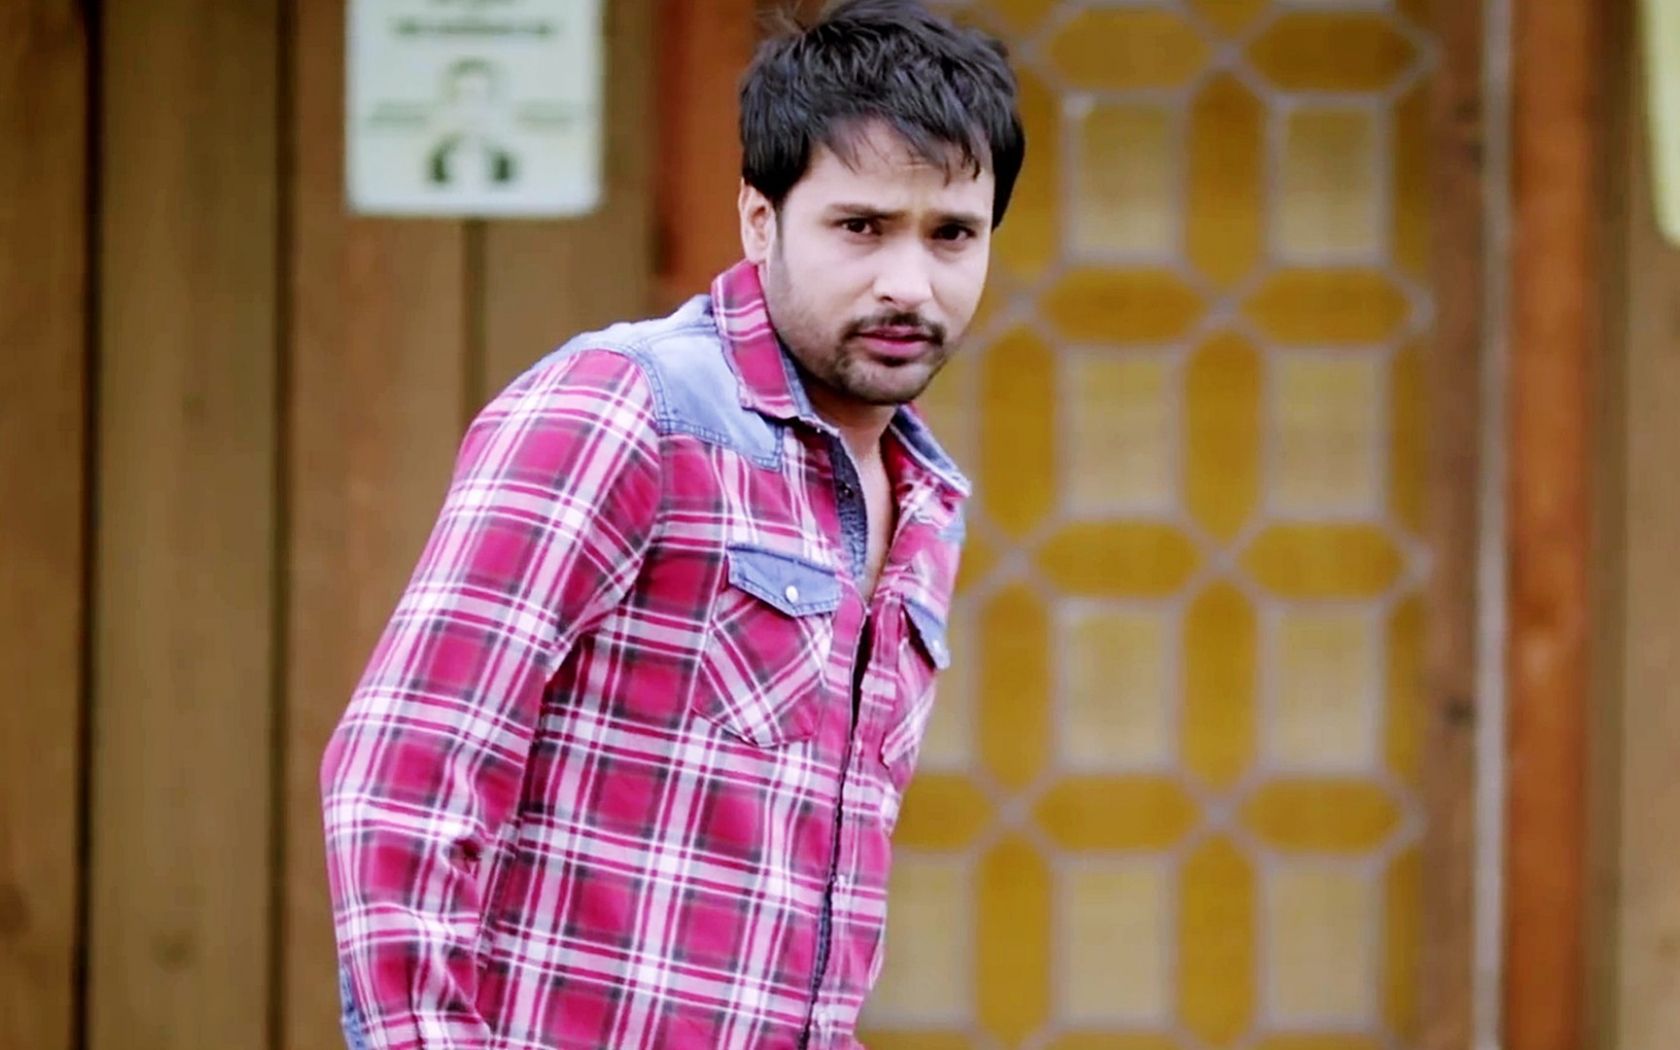 Free download Amrinder Gill In Check Shirt Wallpaper 00004 Baltana [1920x1080] for your Desktop, Mobile & Tablet. Explore Shirt Wallpaper. Shirt Wallpaper, Taylor Lautner Shirt Off Wallpaper